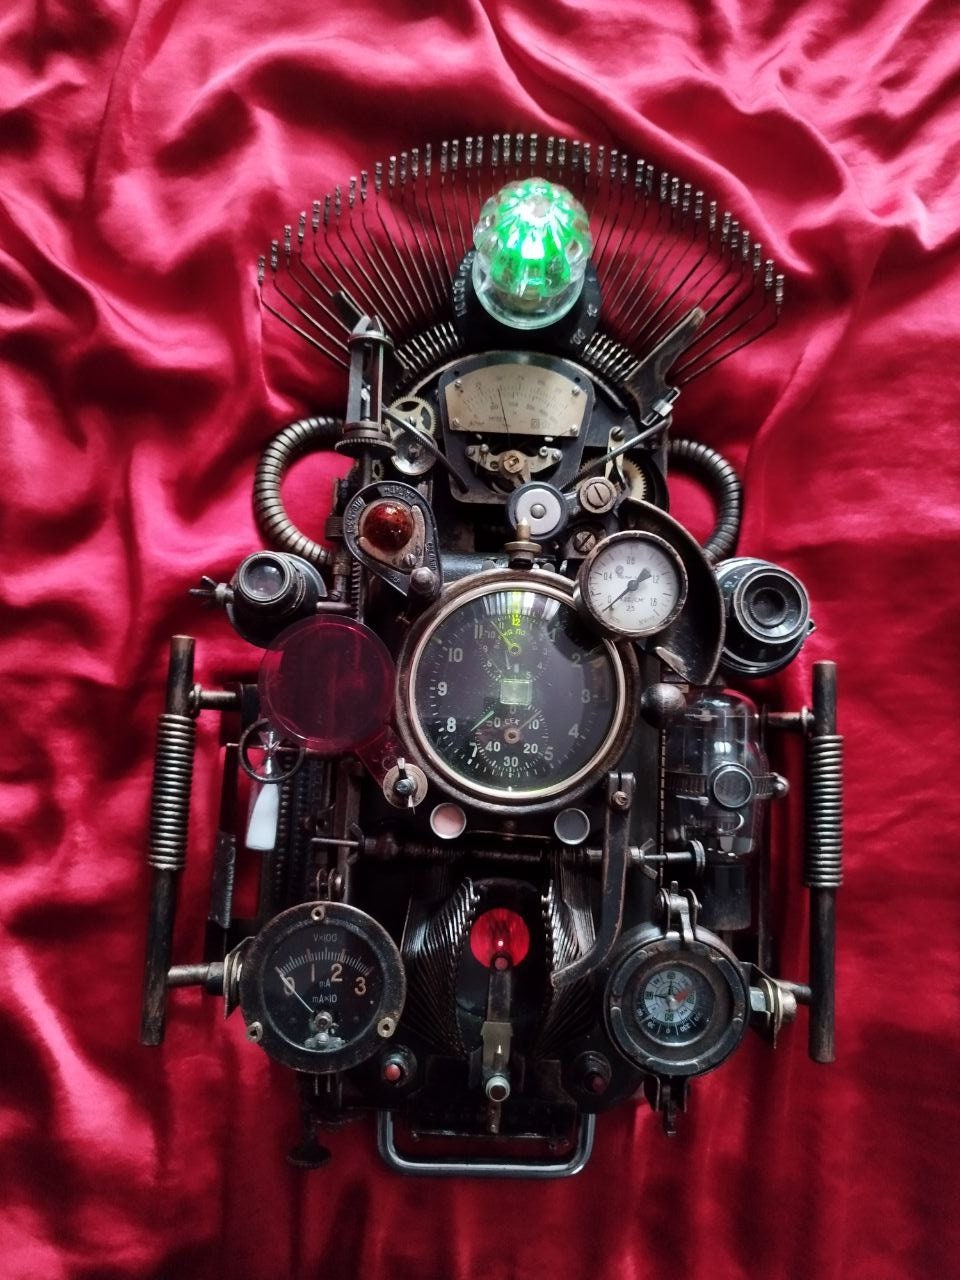 Steampunk Wall Clock to Order, From Three Week Free Delivery 